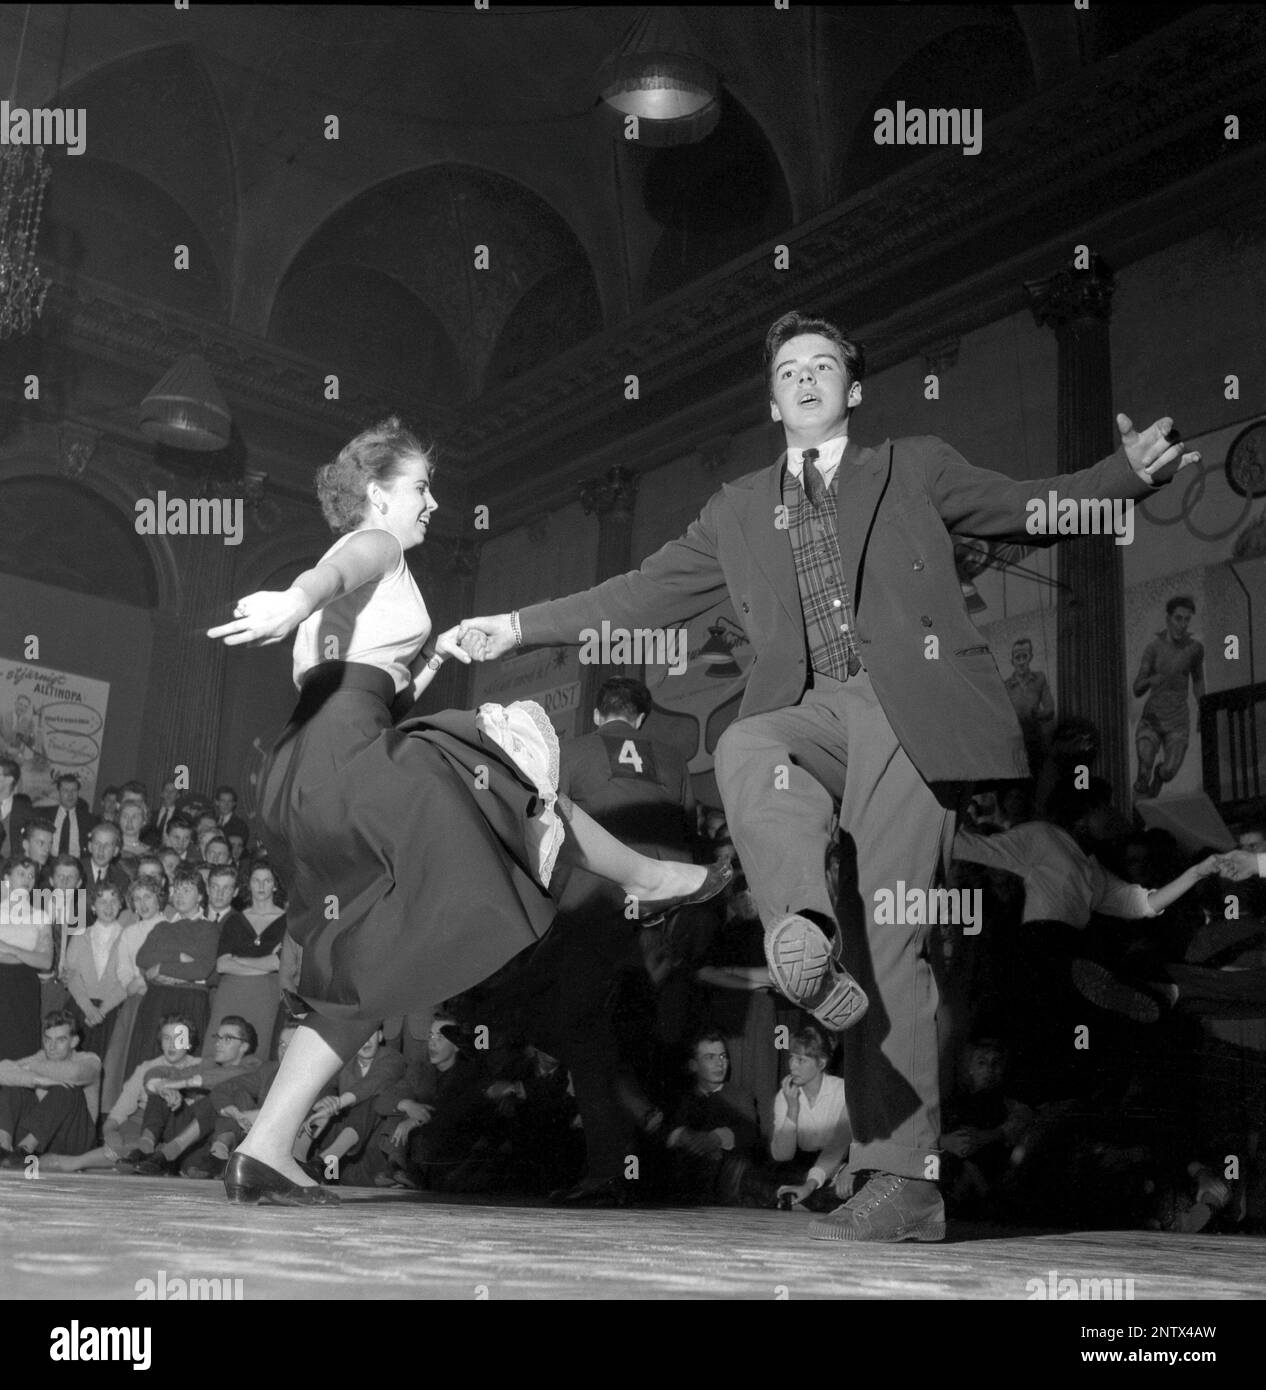 Dancing in the 1950s. A young couple is pictured on the dance floor at Nalen Stockholm, dancing the Sluefoot. Dancing the Sluefootcan be done to most any jazz beat, som of the steps in this dance are referred to as Slueing. The dance features considerable leg jolting, arm jabbing and shuffling.  A dance that was made somewhat popular by american dancers Leslie Caron and Fred Astaire in the 1955 film Daddy long legs. Sweden 1957 Conard ref 3122 Stock Photo